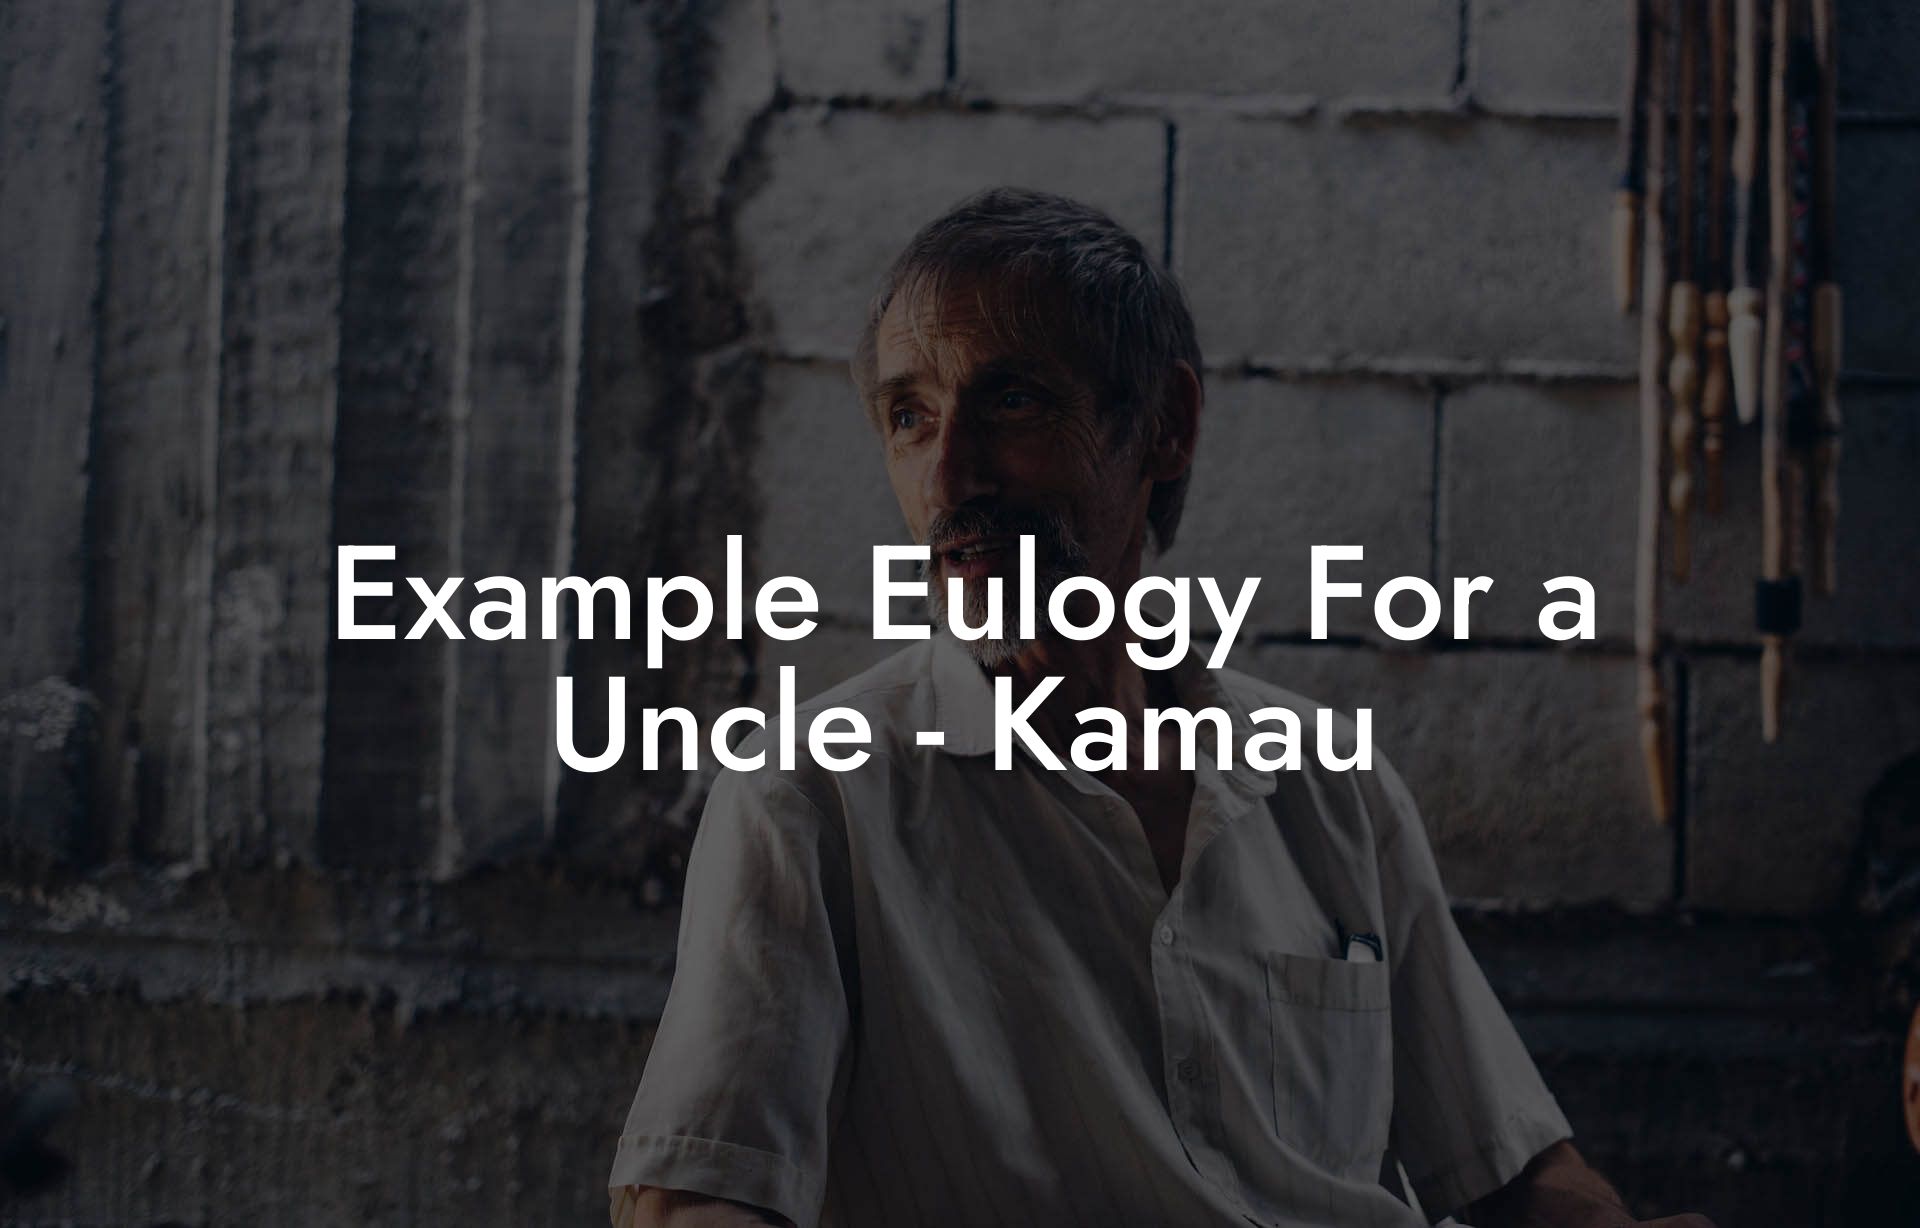 Example Eulogy For a Uncle - Kamau